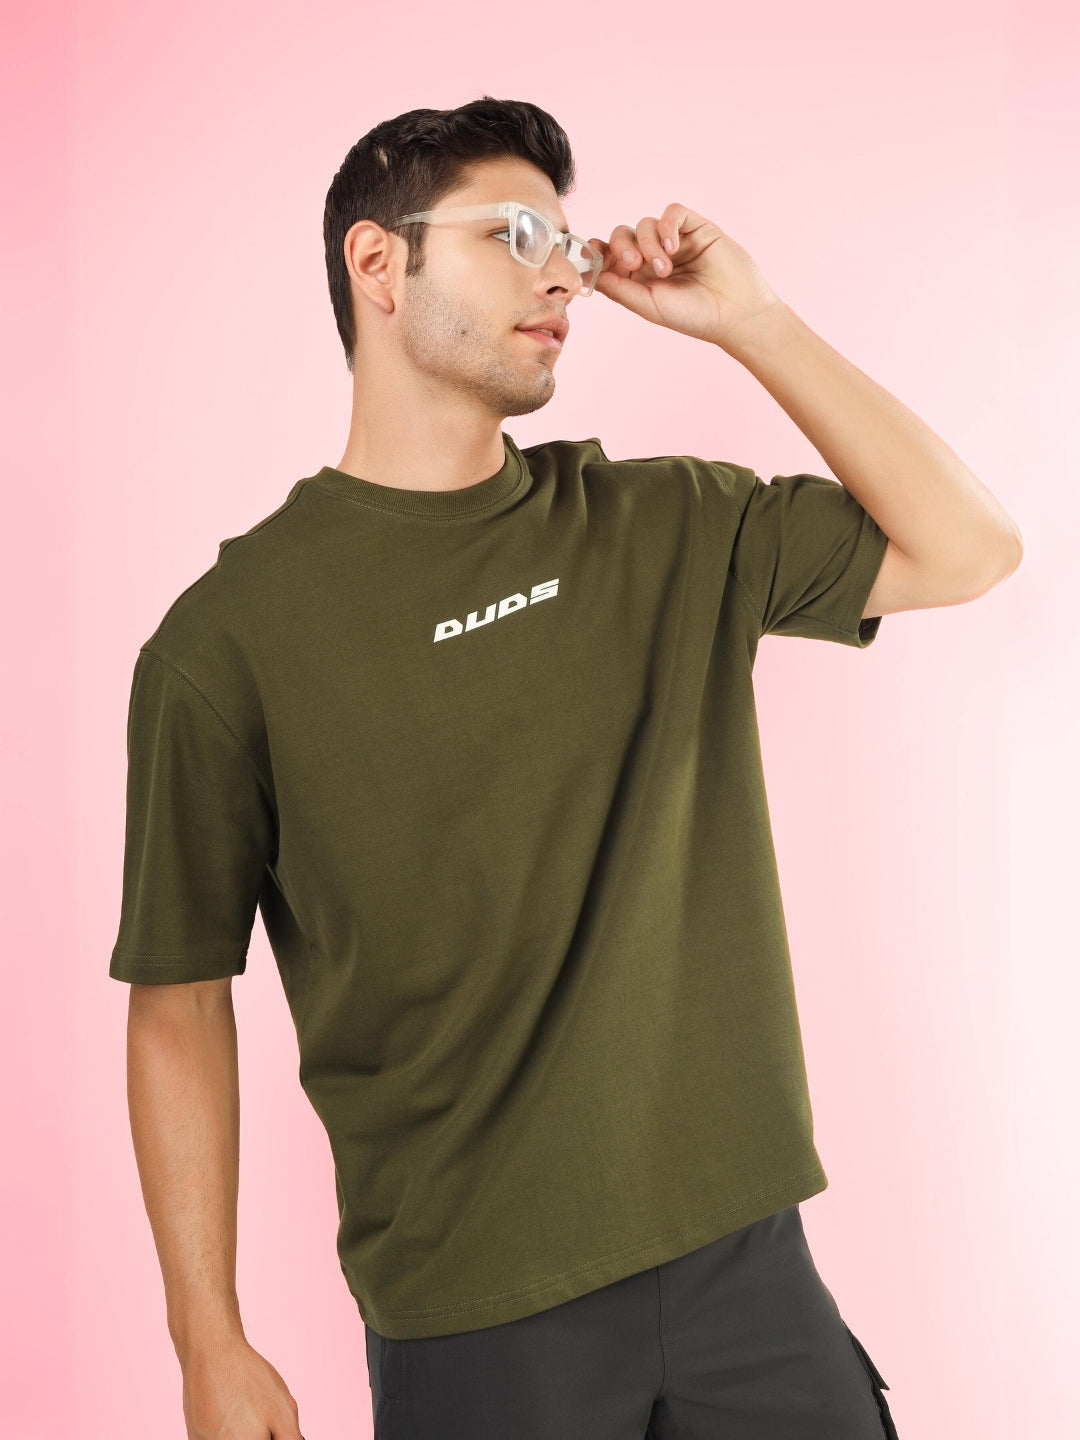 Amour Over-Sized T-Shirt (Olive Green )